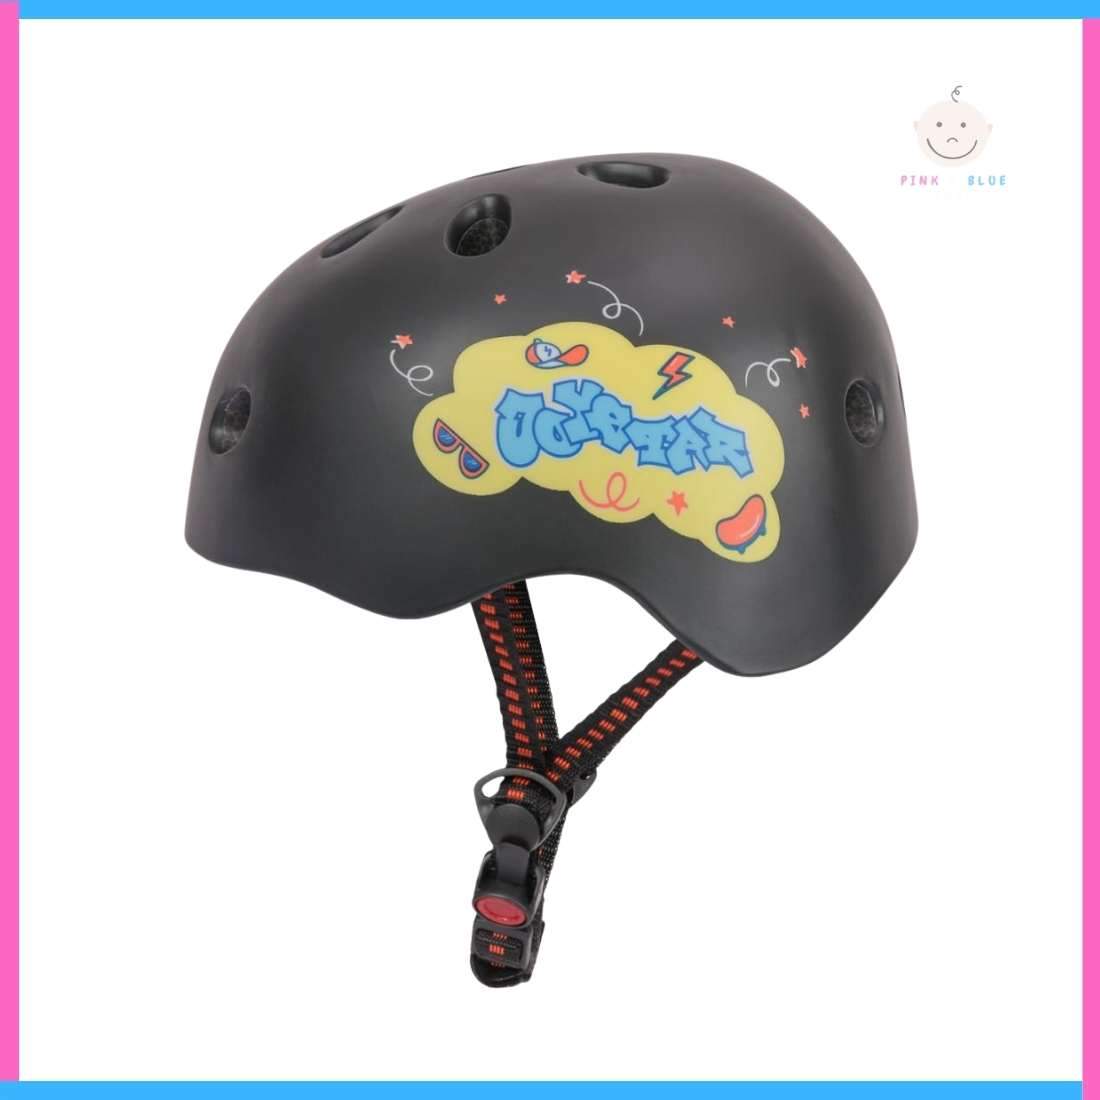 Ultralight Bicycle Helmet For Kids - Pink & Blue Baby Shop - Review